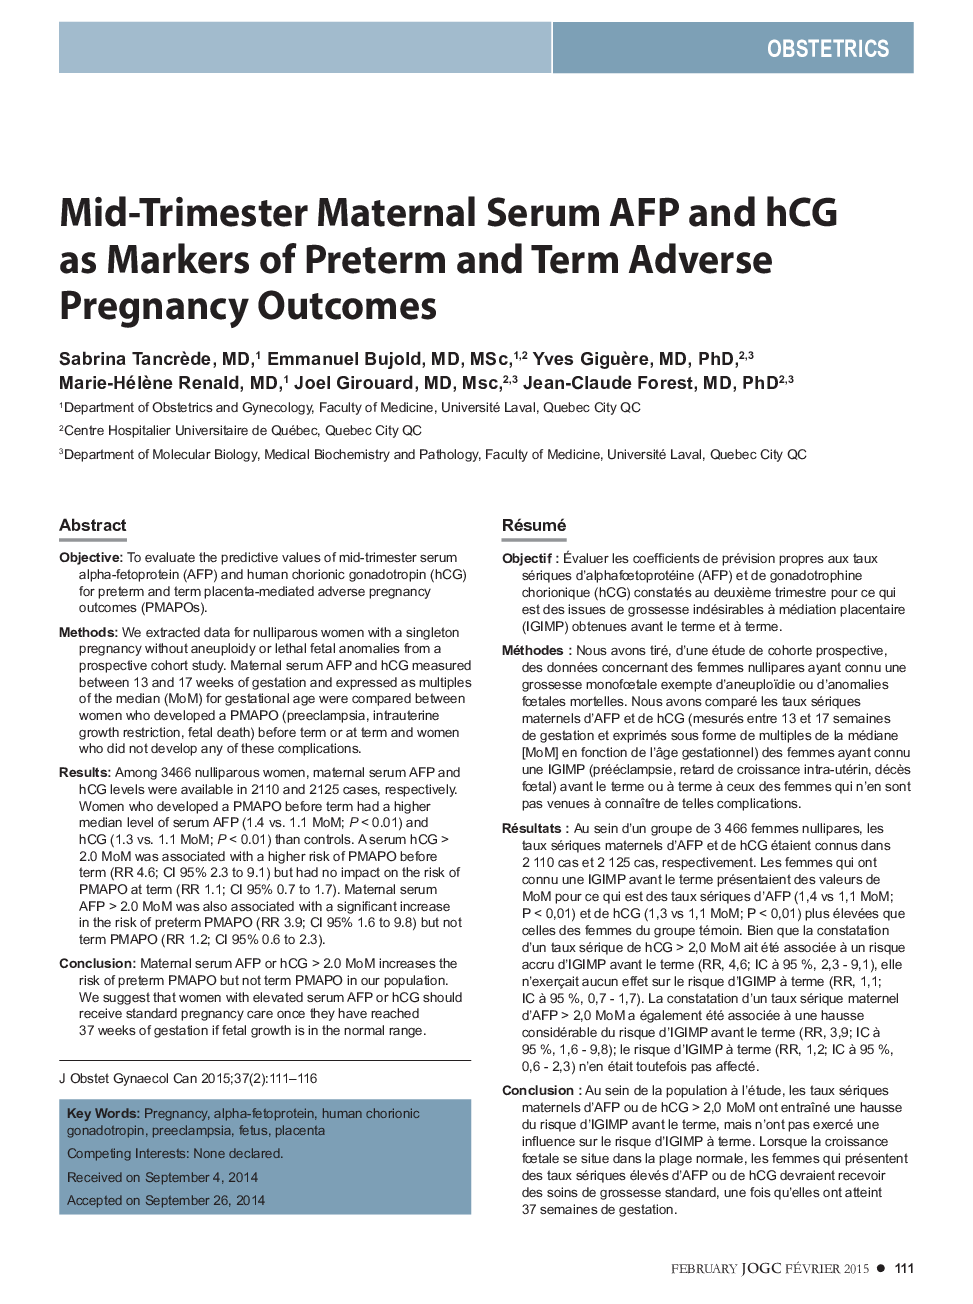 Mid-Trimester Maternal Serum AFP and hCG as Markers of Preterm and Term Adverse Pregnancy Outcomes